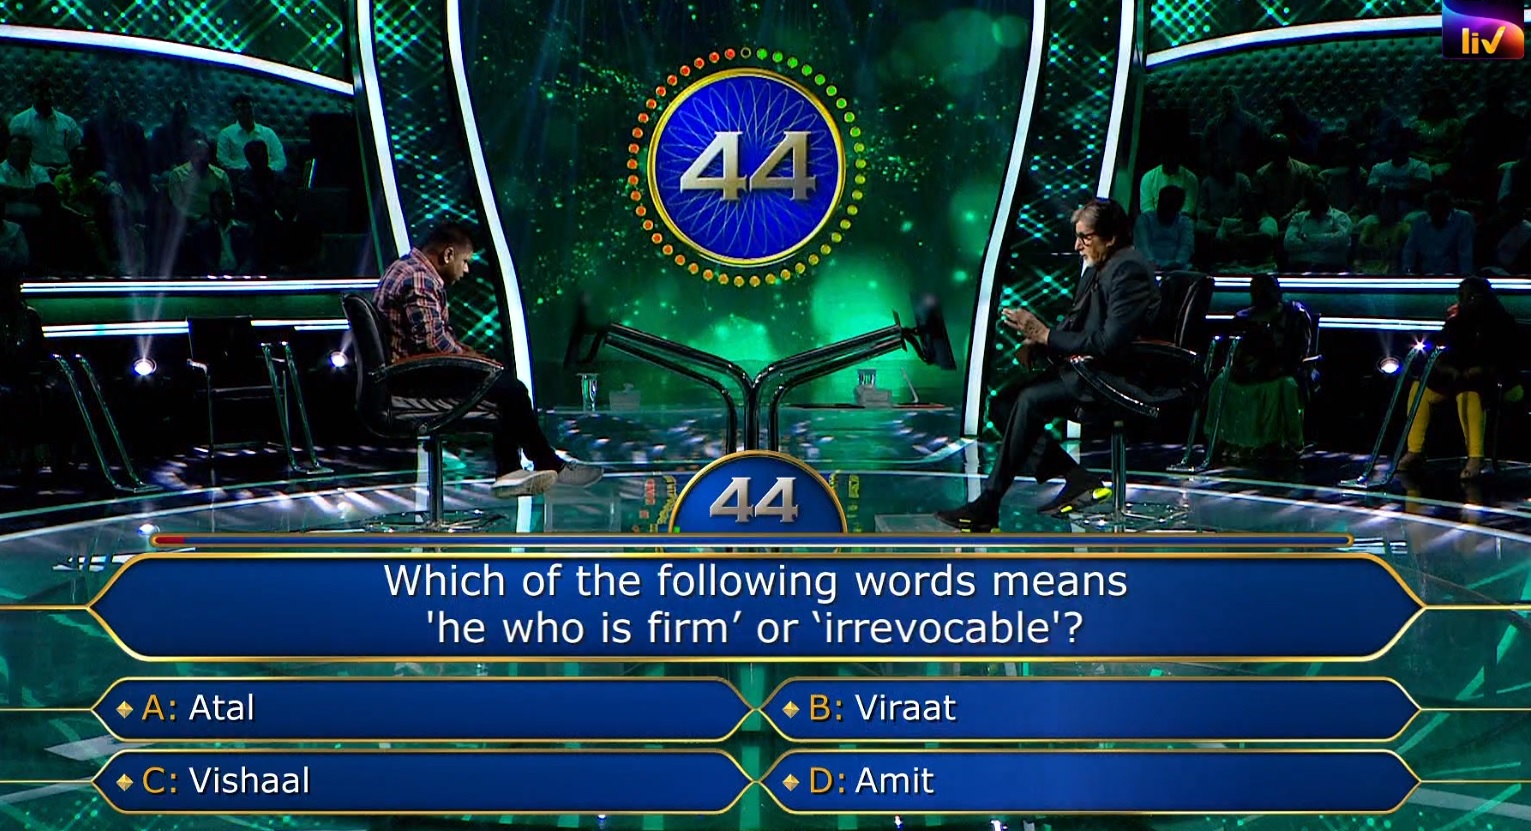 Ques : Which of the following words means ‘he who is firm’ or ‘irrevocable’?